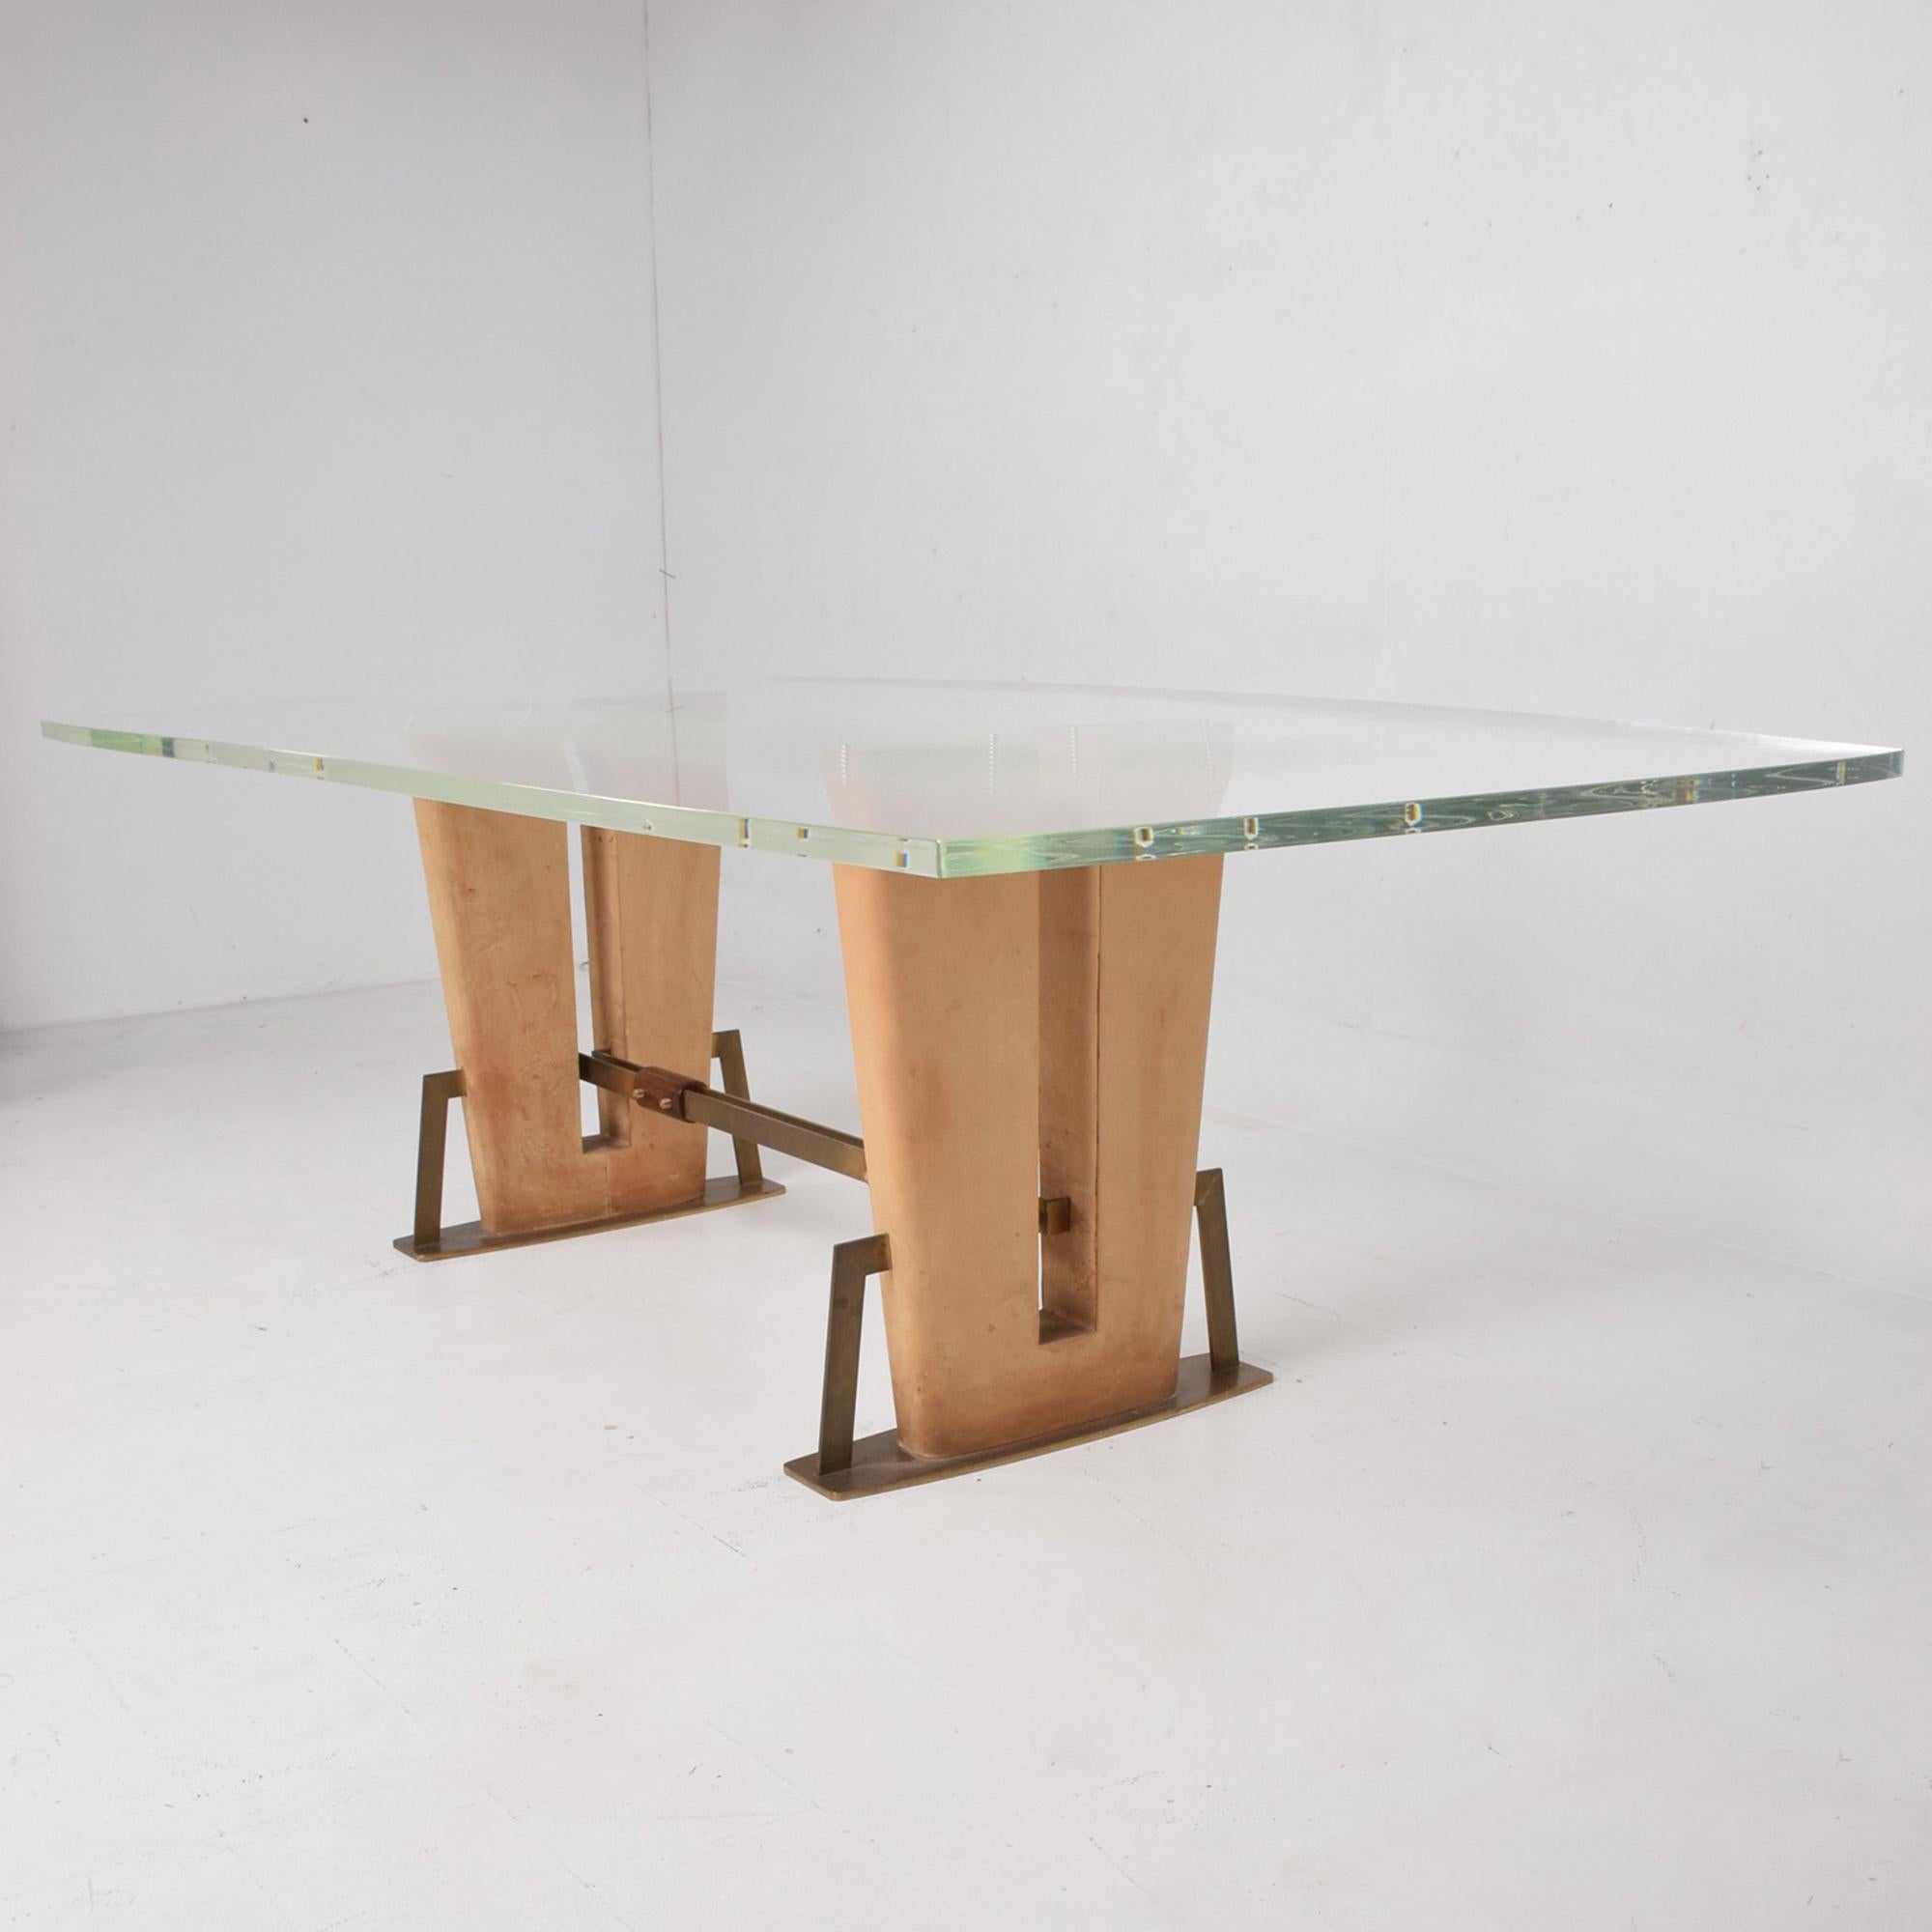 
Mexico 1960s exceptional Lucite Dining Table bronze angled leather base Mahogany and Solid Brass.
New Lucite tabletop has curved sides.
It is 1-inch-thick secured by eight (8) brass pegs.
Unsigned attribution is to Arturo Pani.
Please review all